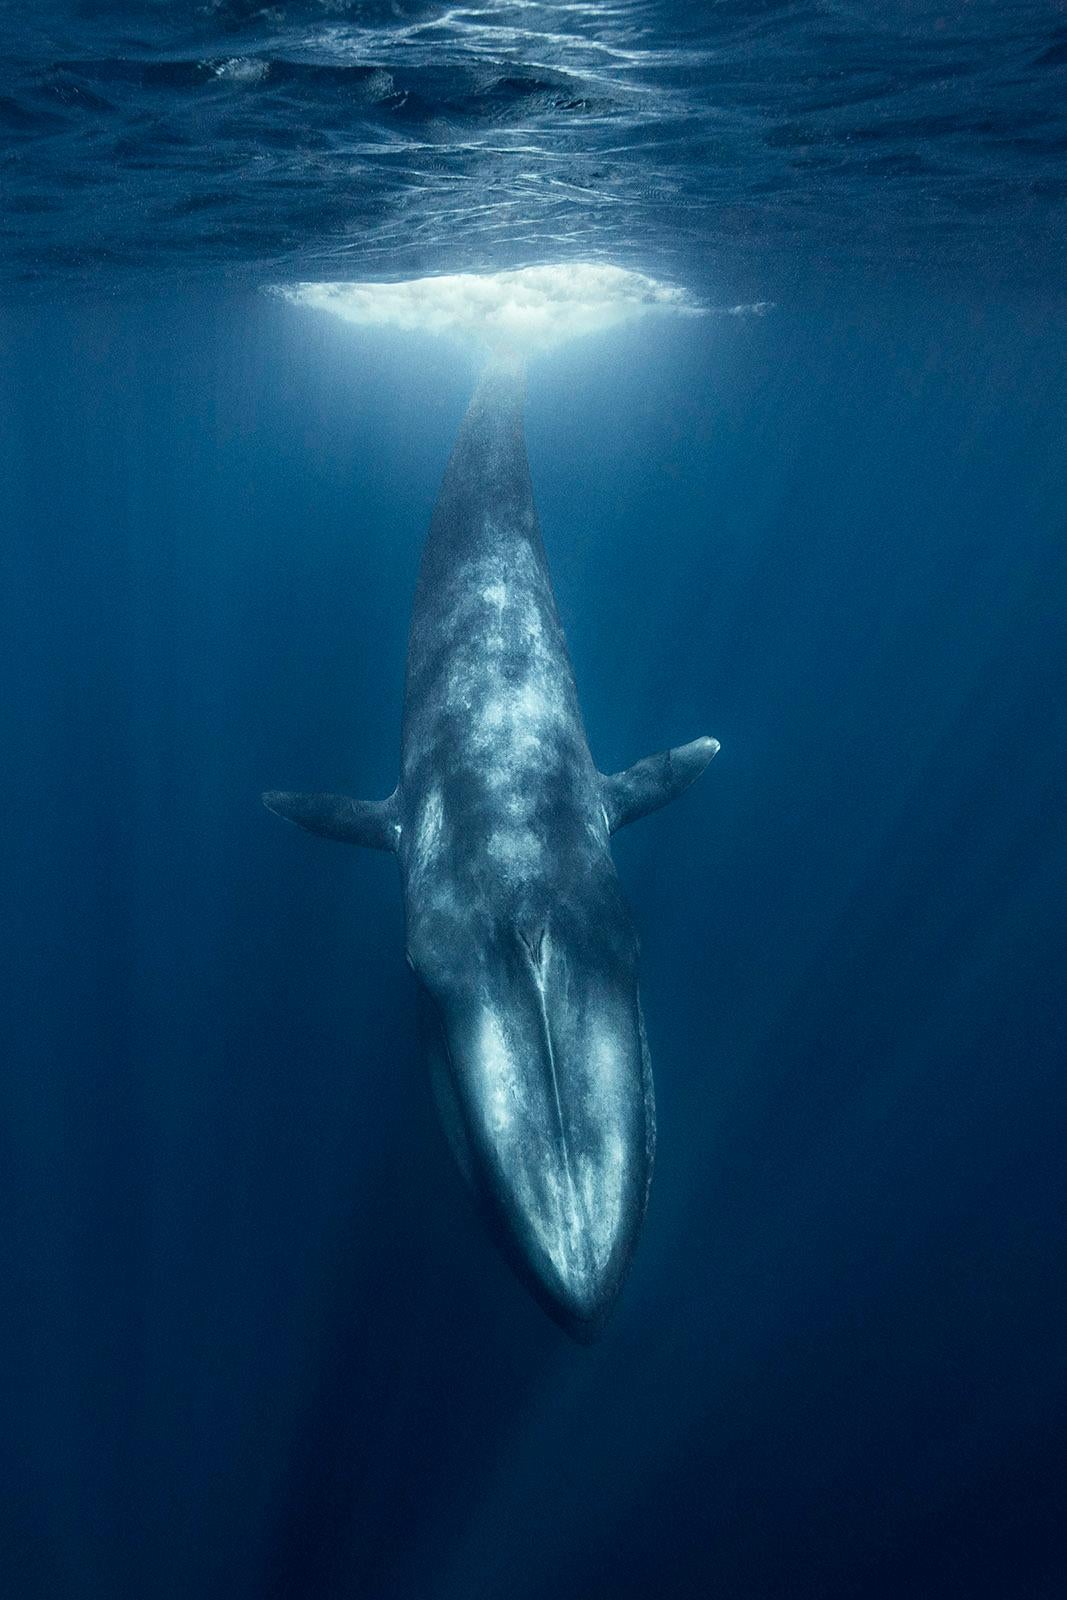 Olivier Borde Still-Life Photograph - Dives Blue Whale - Signed limited nature fine art print, Color underwater photo